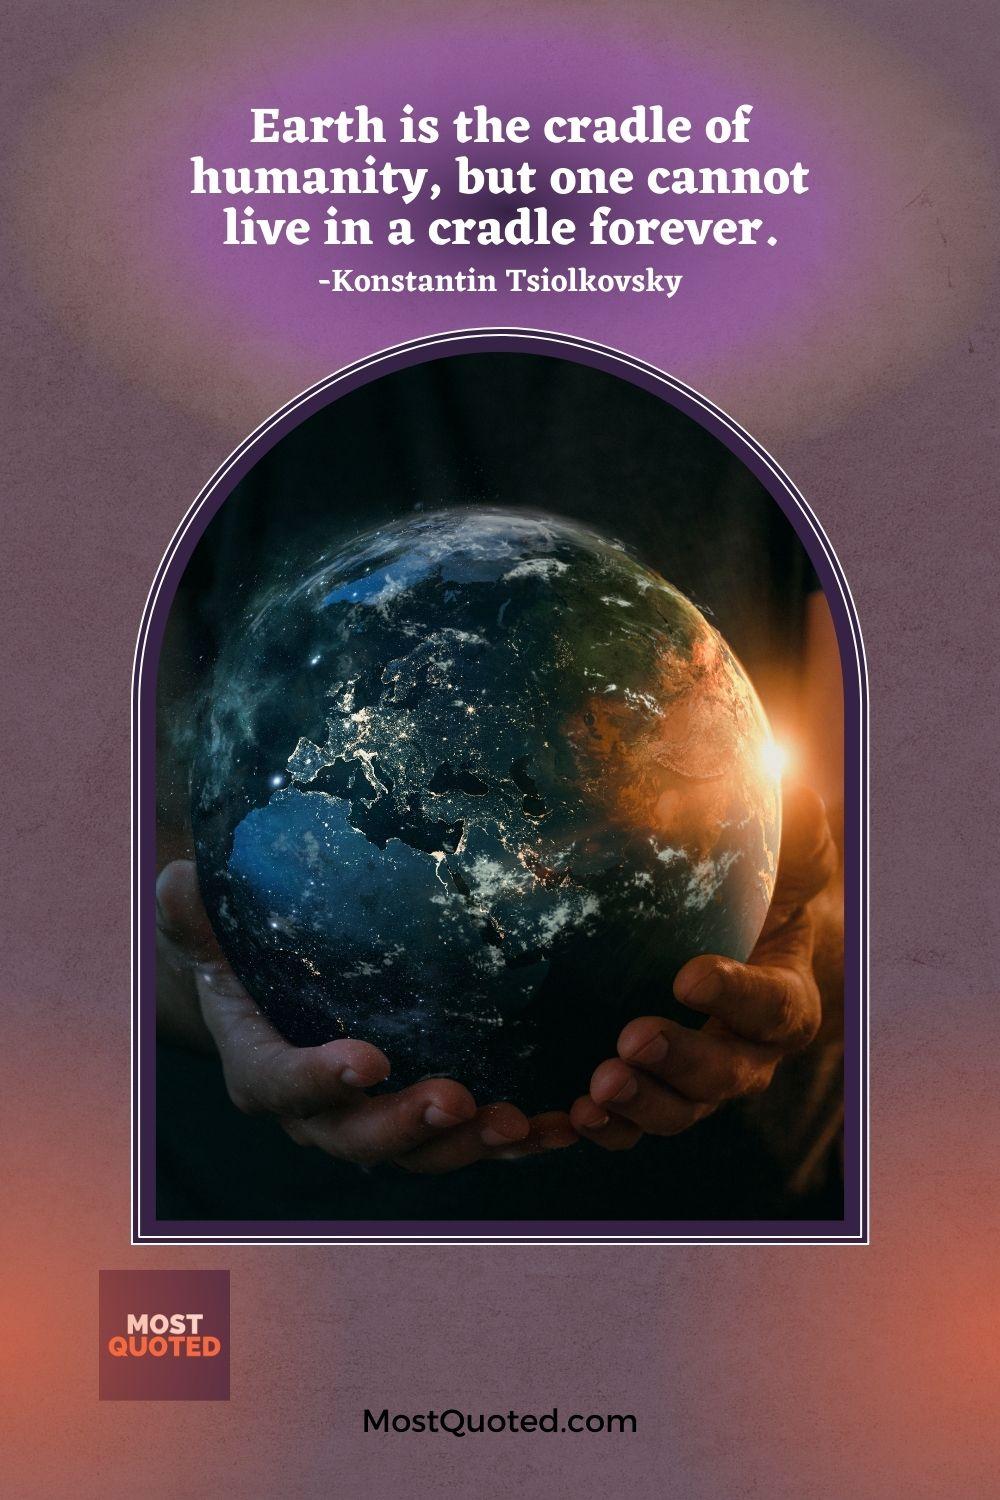 Earth is the cradle of humanity, but one cannot live in a cradle forever. - Konstantin Tsiolkovsky